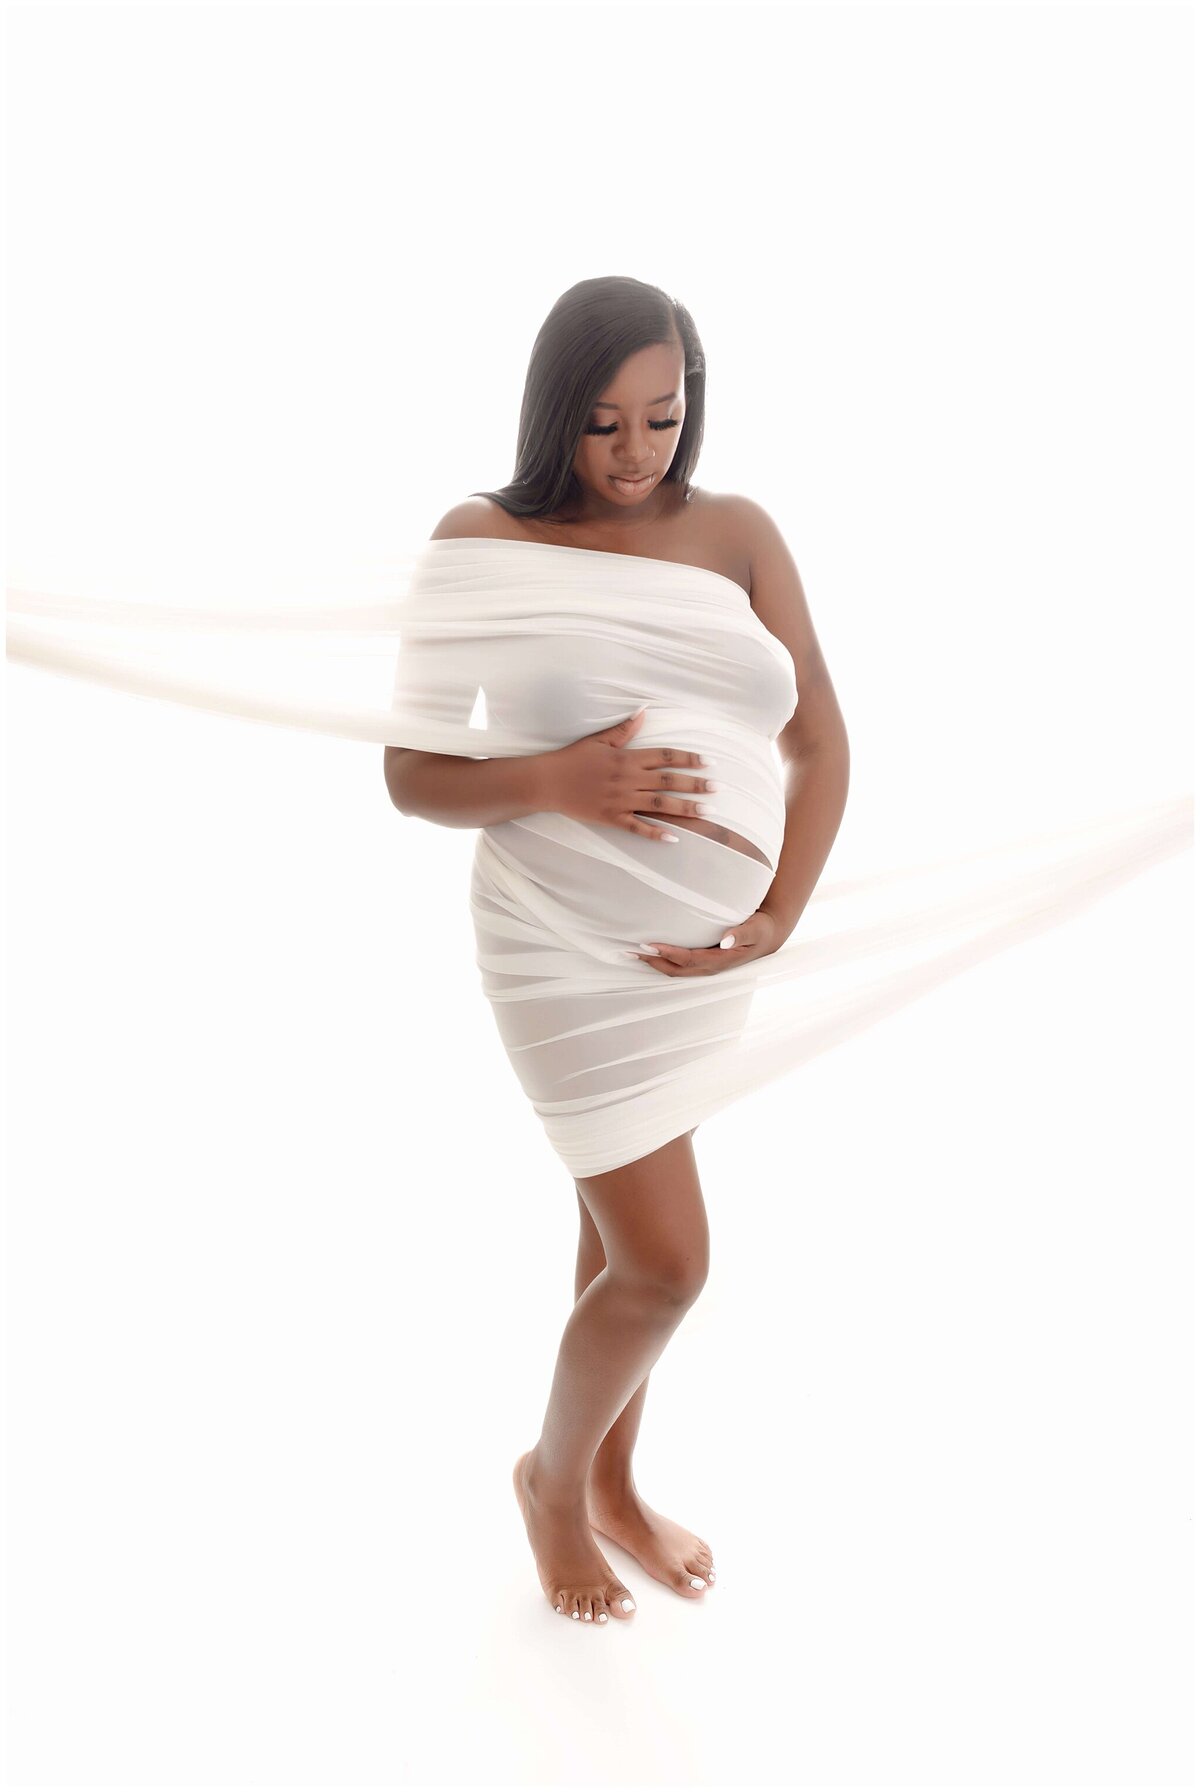 a pregnant person in a white fabric holding her belly and looking down admiring..